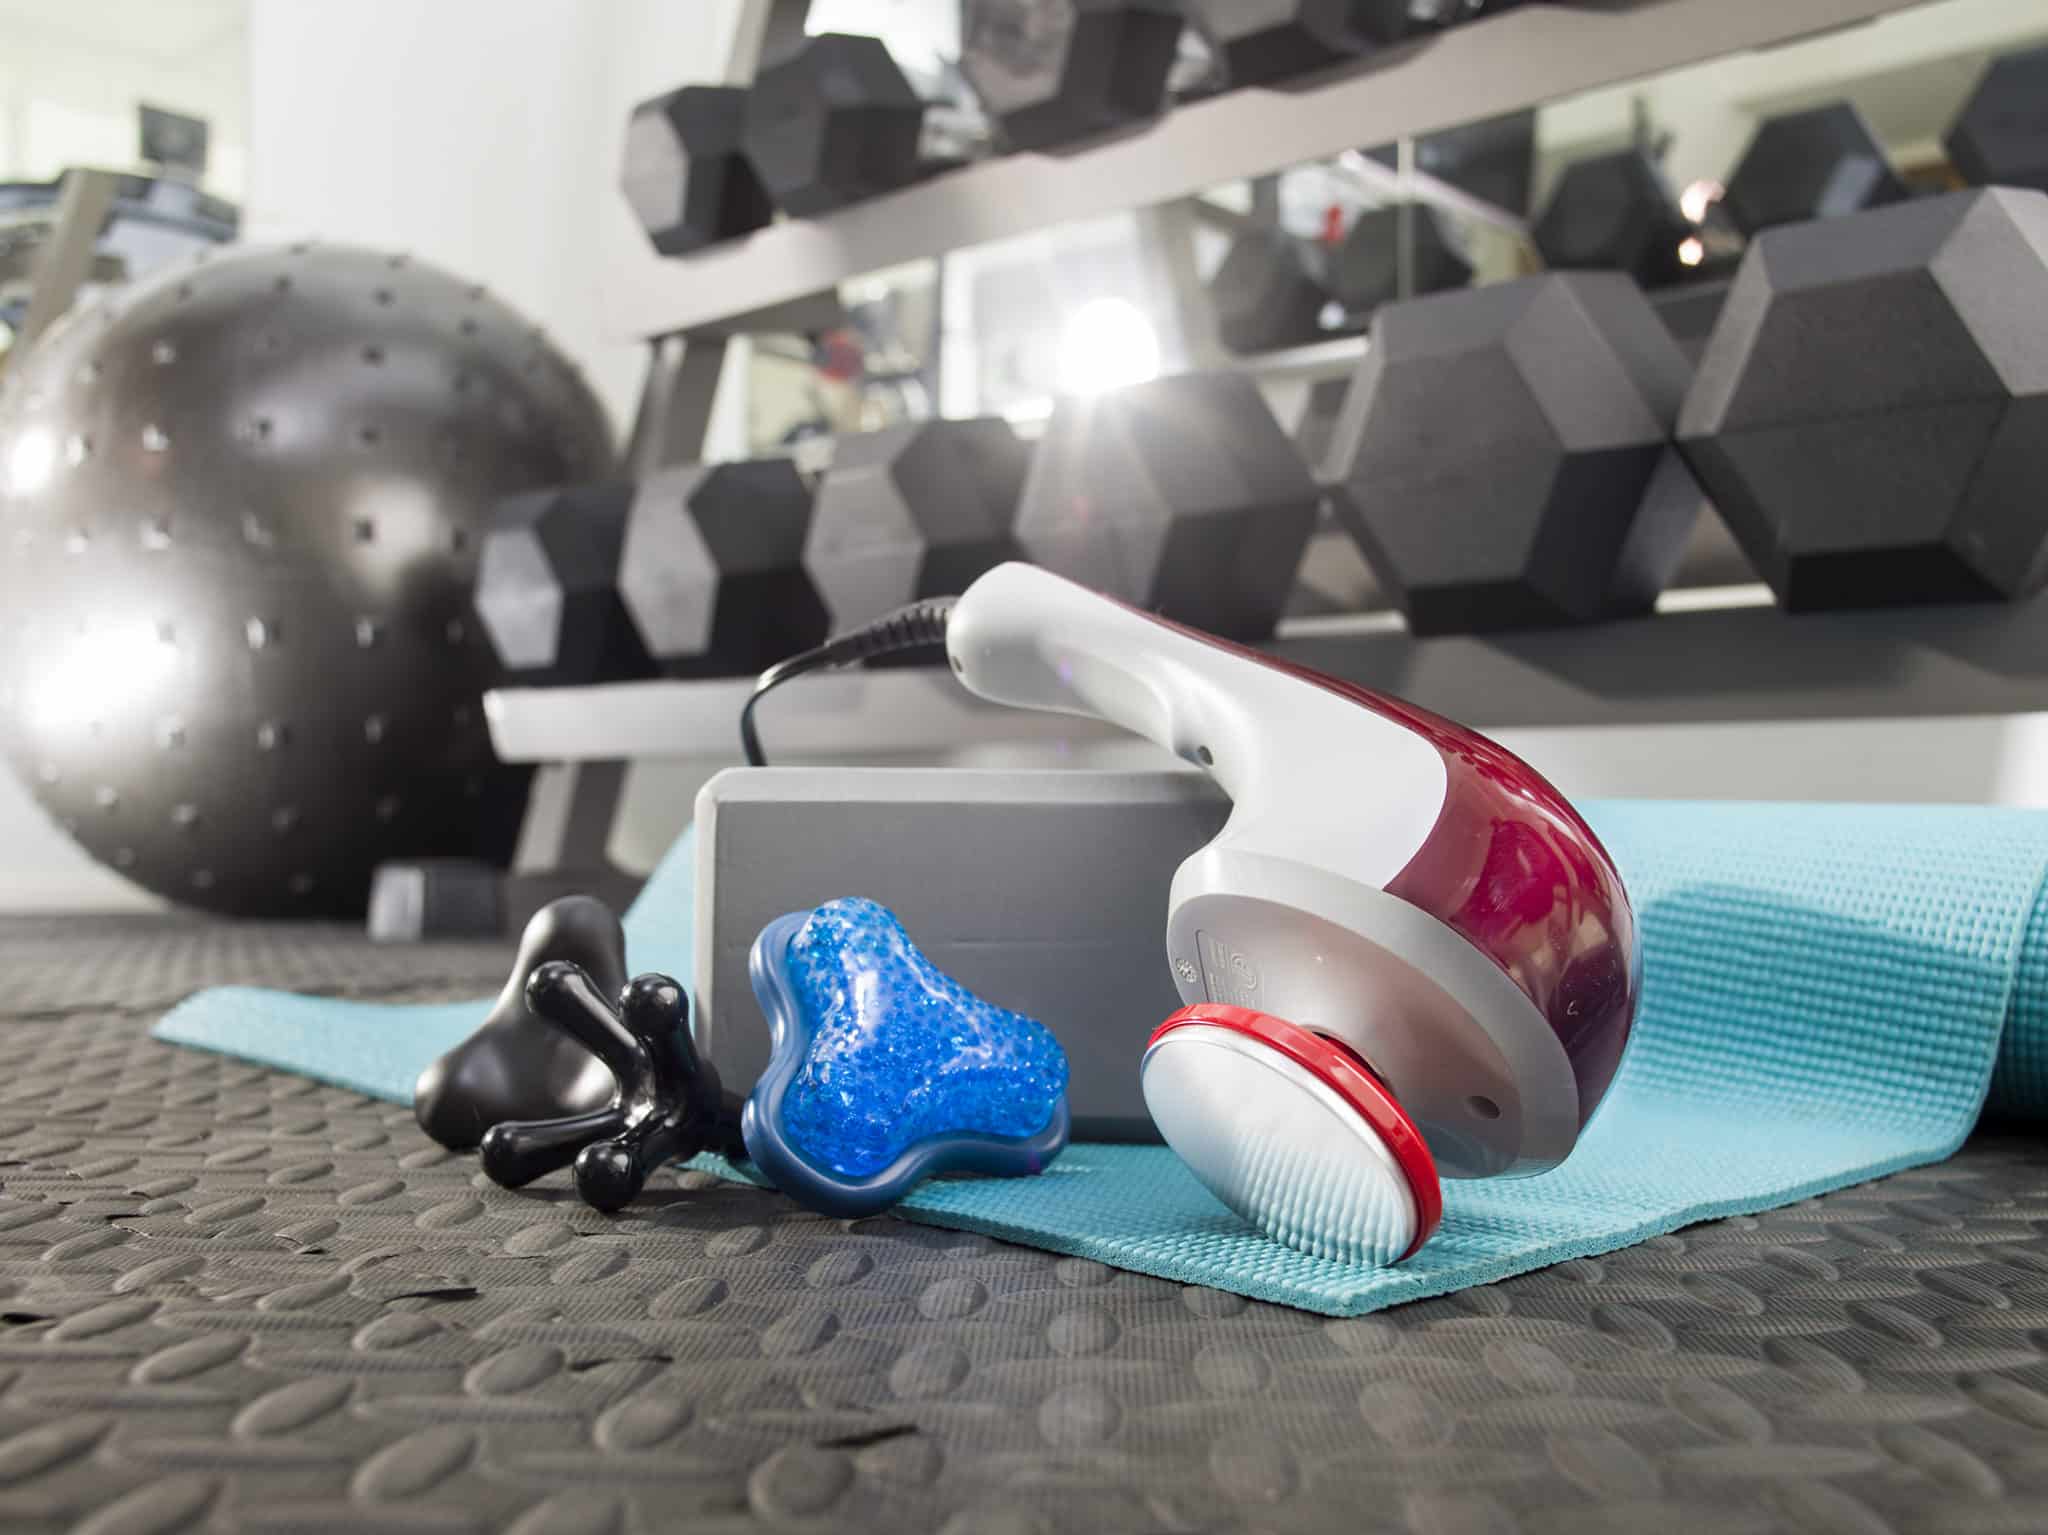 Wahl Hot/Cold Therapy Massager laying on gym floor with weights in the background